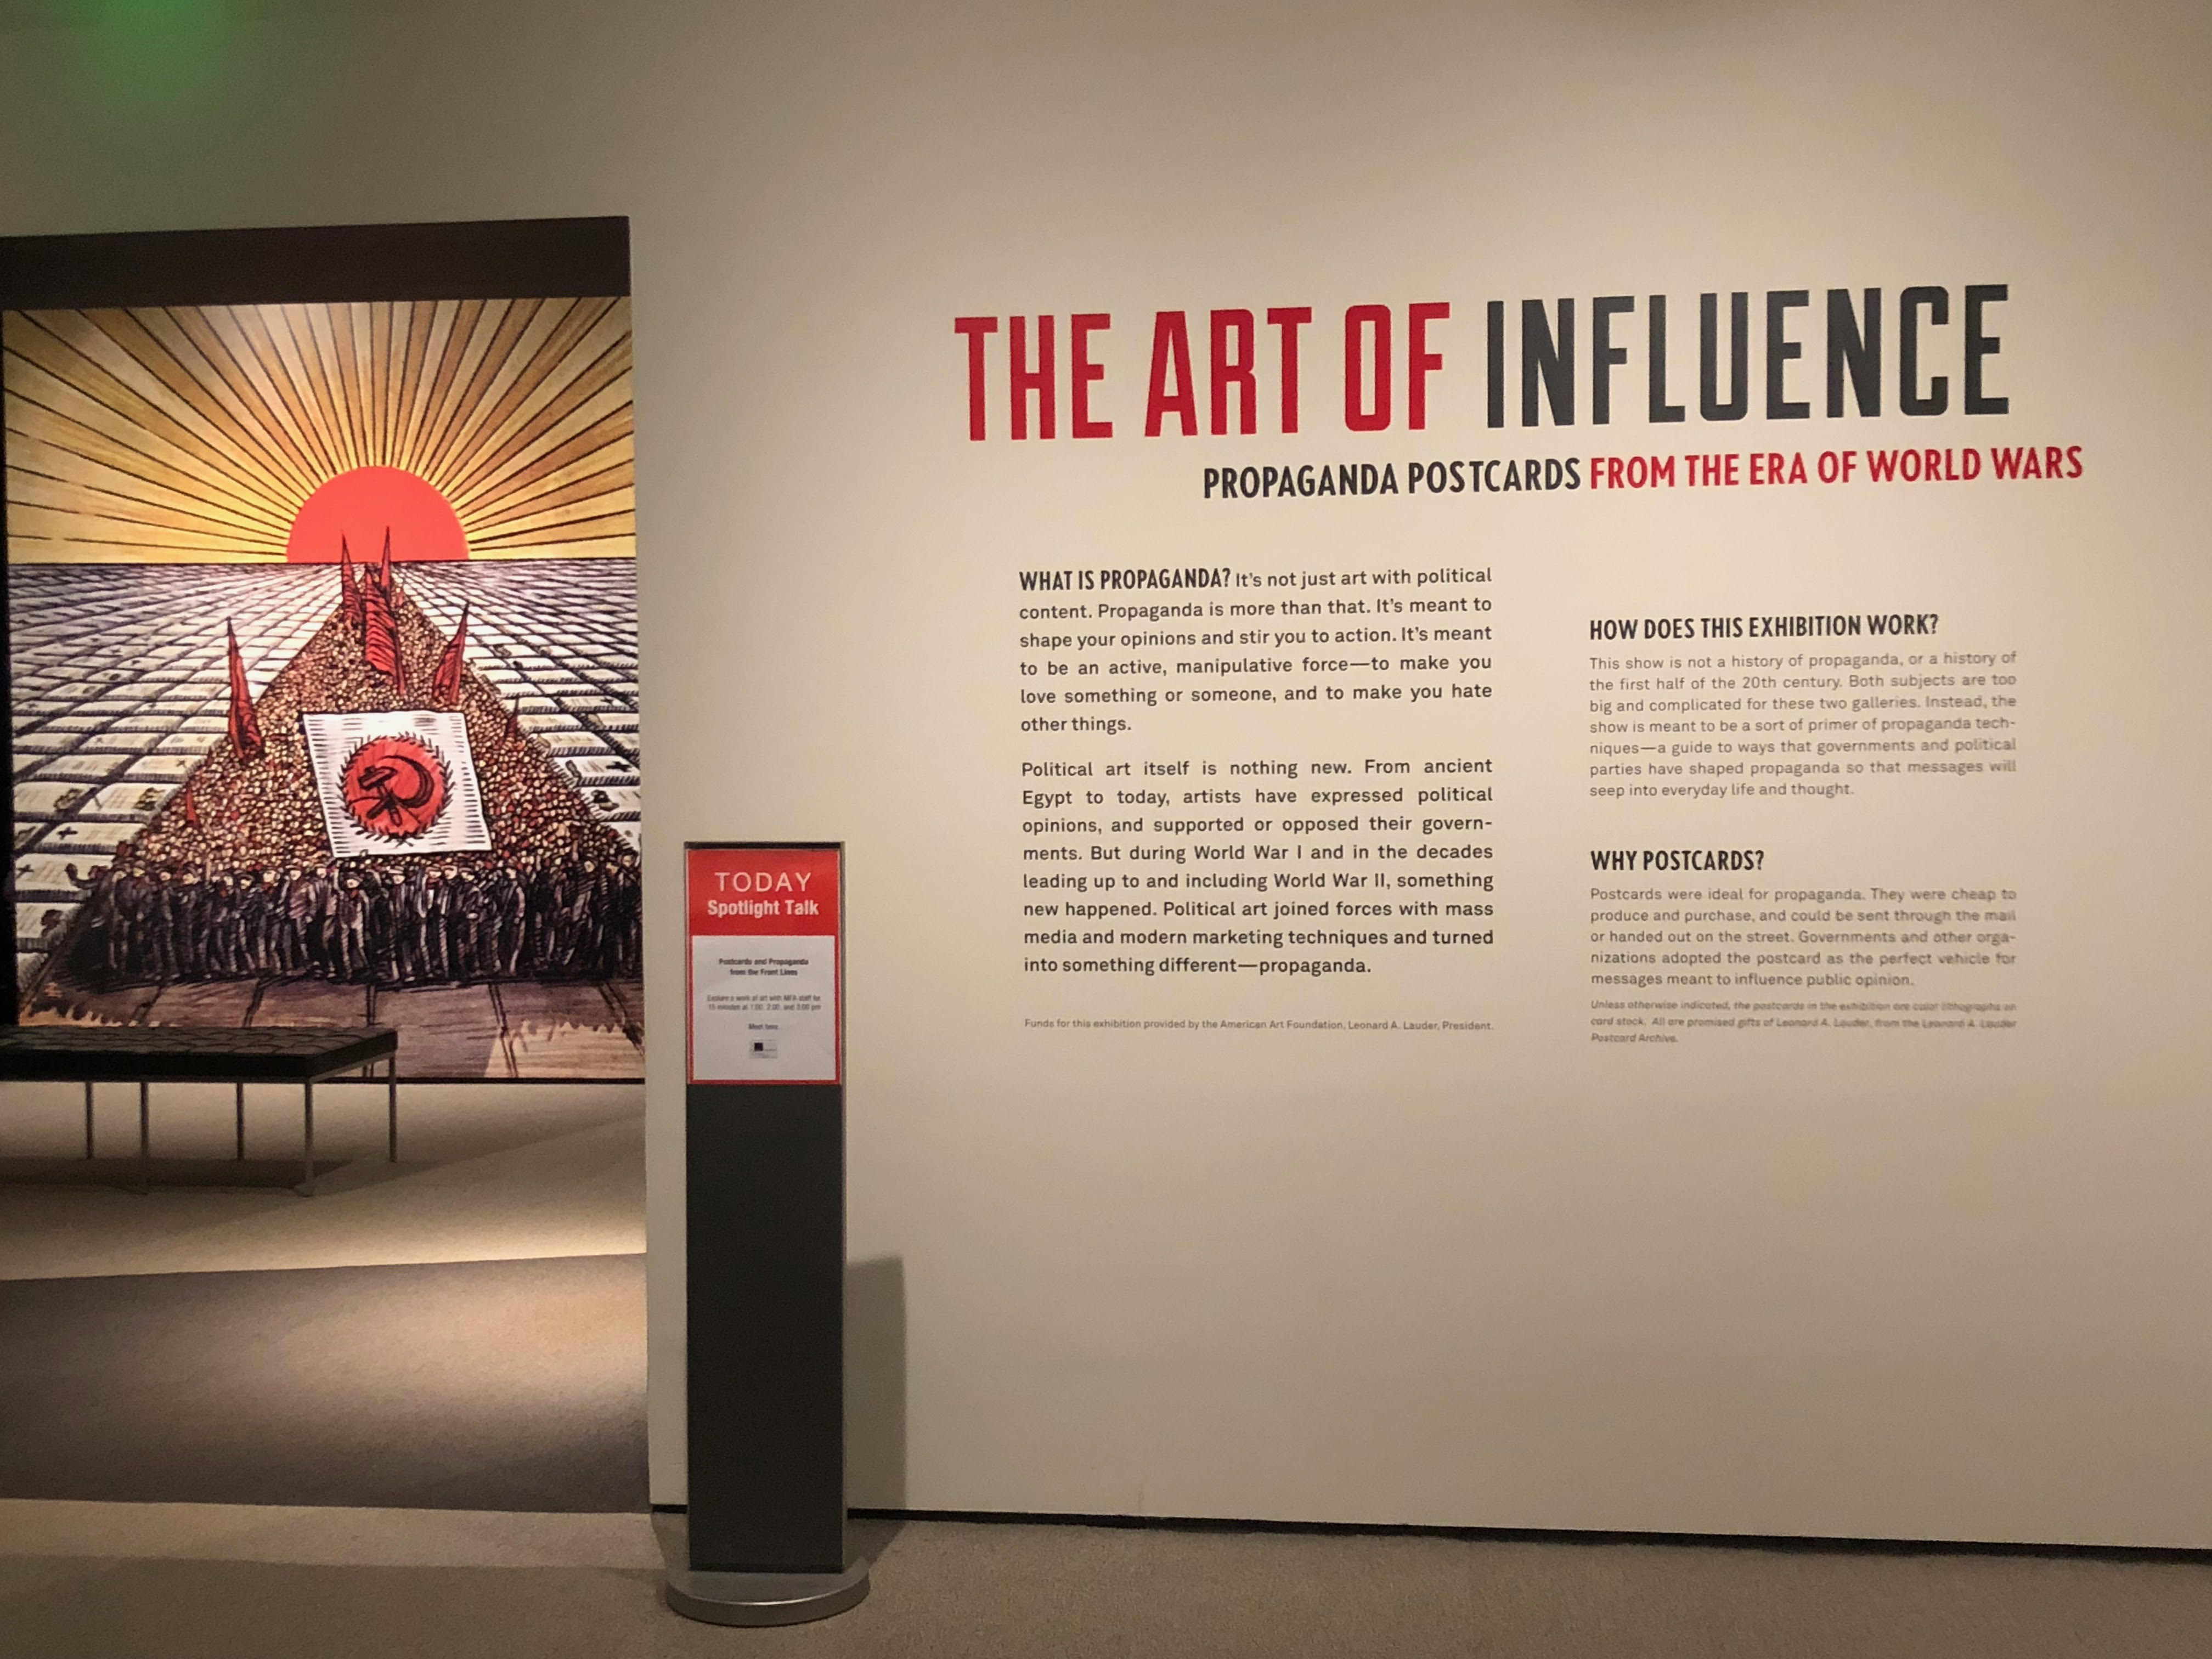 Art of Influence exhibit at the Museum of Fine Arts Boston